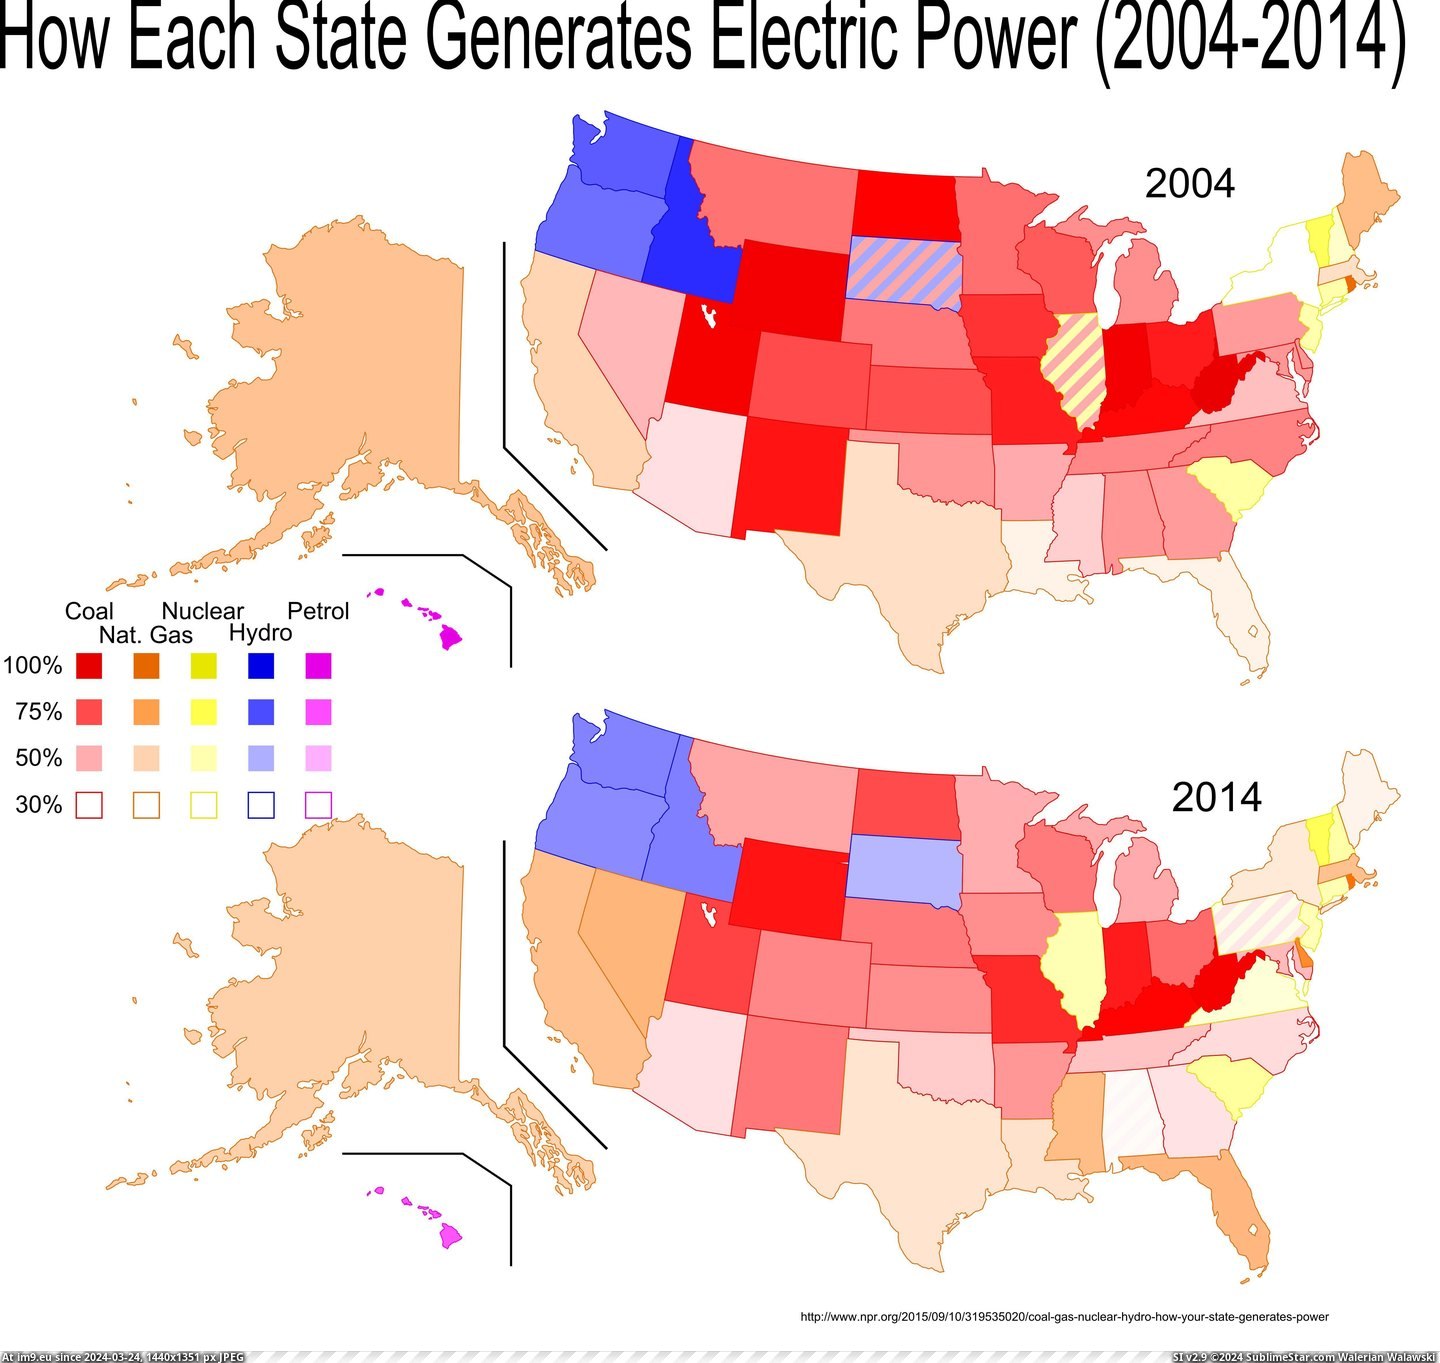 #Source #State #Electricity #Fuel #Common #Production [Mapporn]  Most Common Fuel Source for Electricity Production in Each US State, 2004-2014 [5000x4704] Pic. (Image of album My r/MAPS favs))